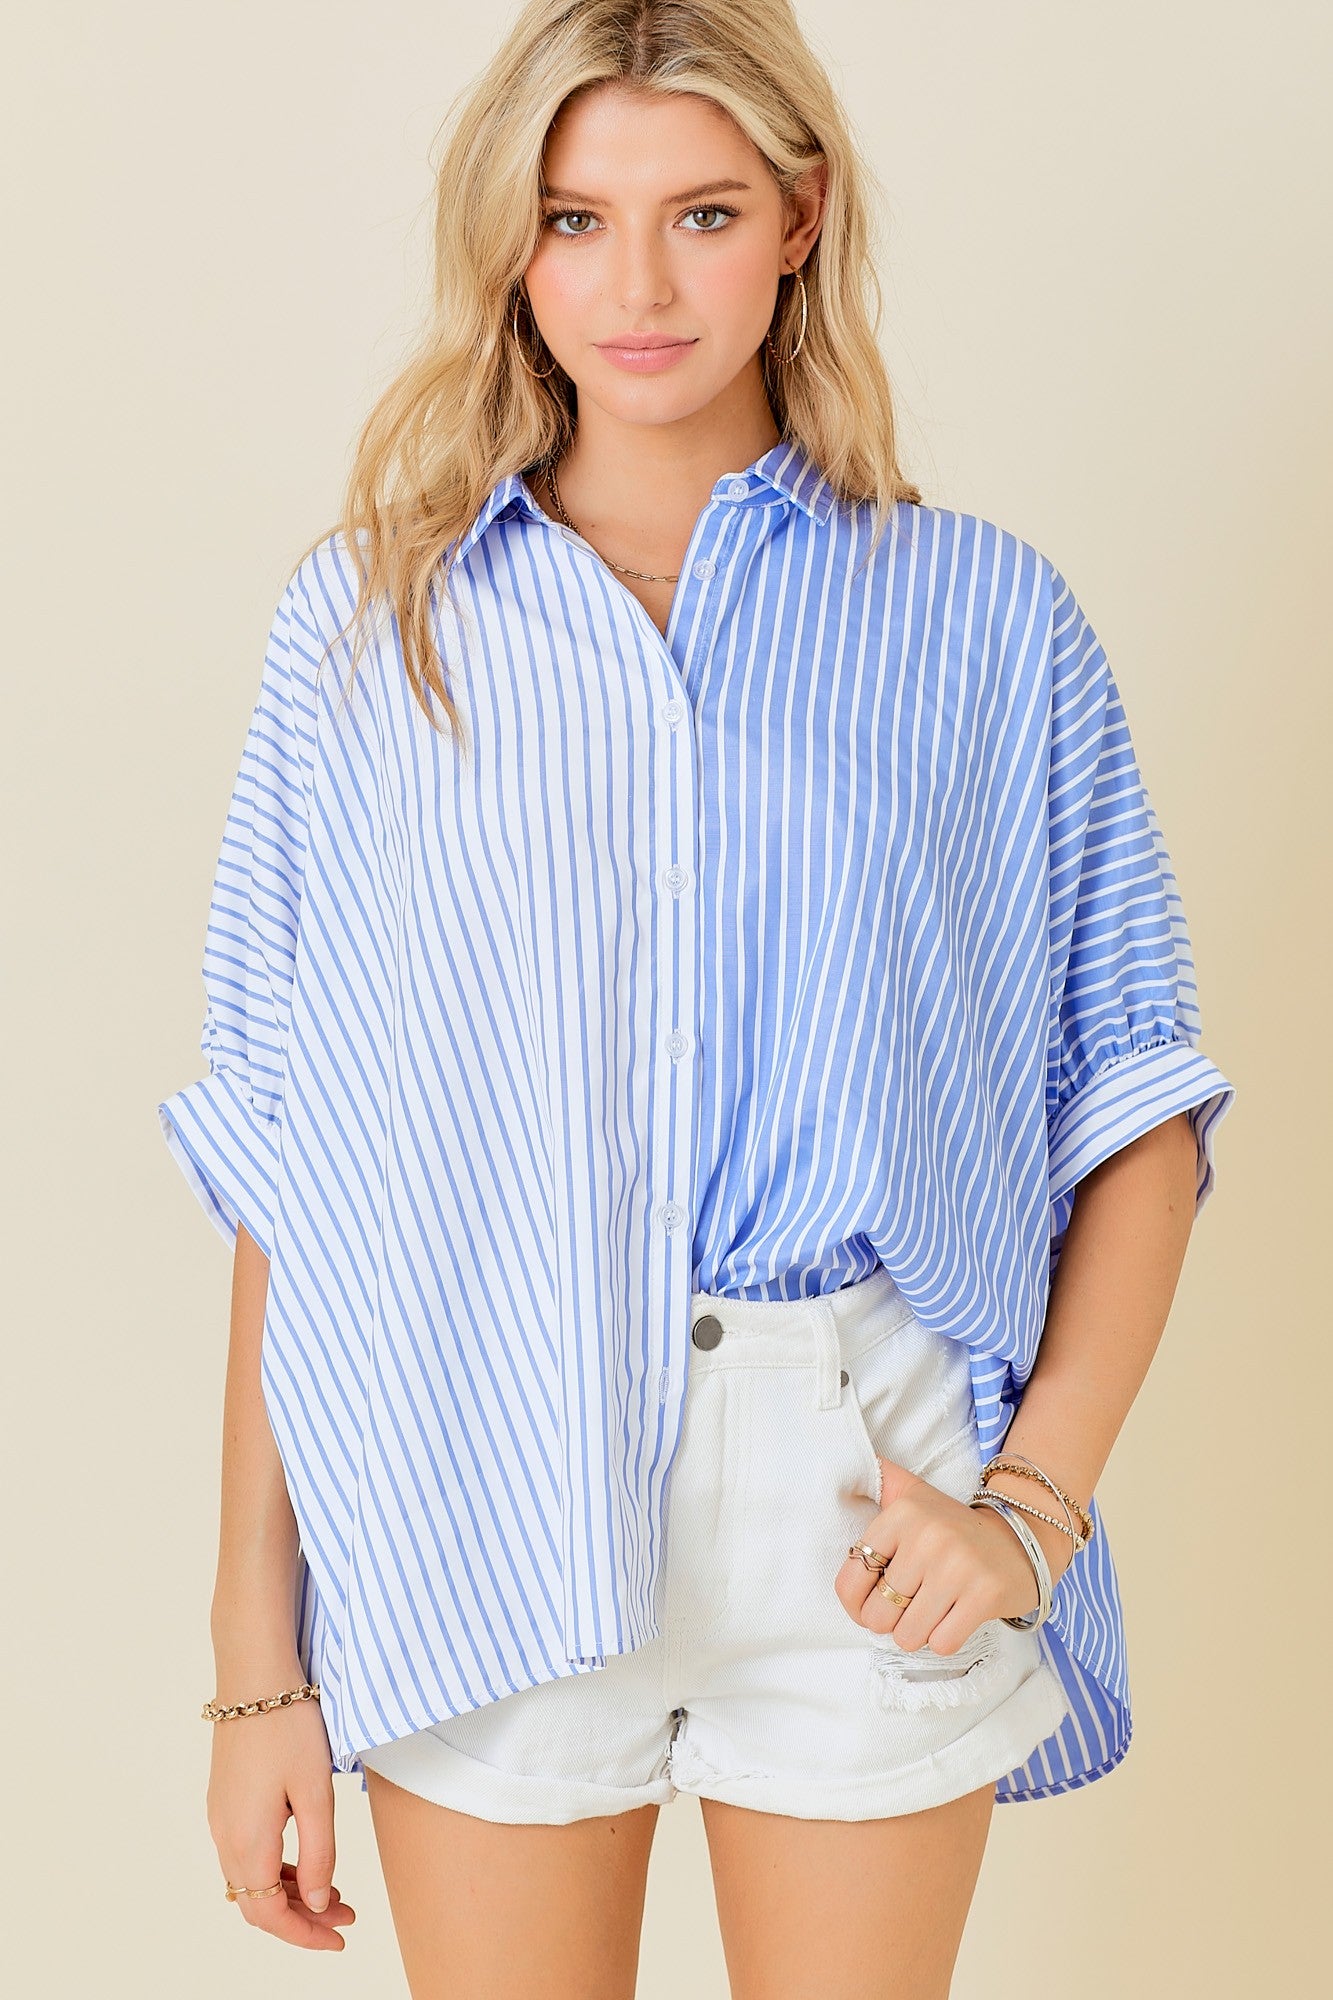 Sweetly Striped Blouse